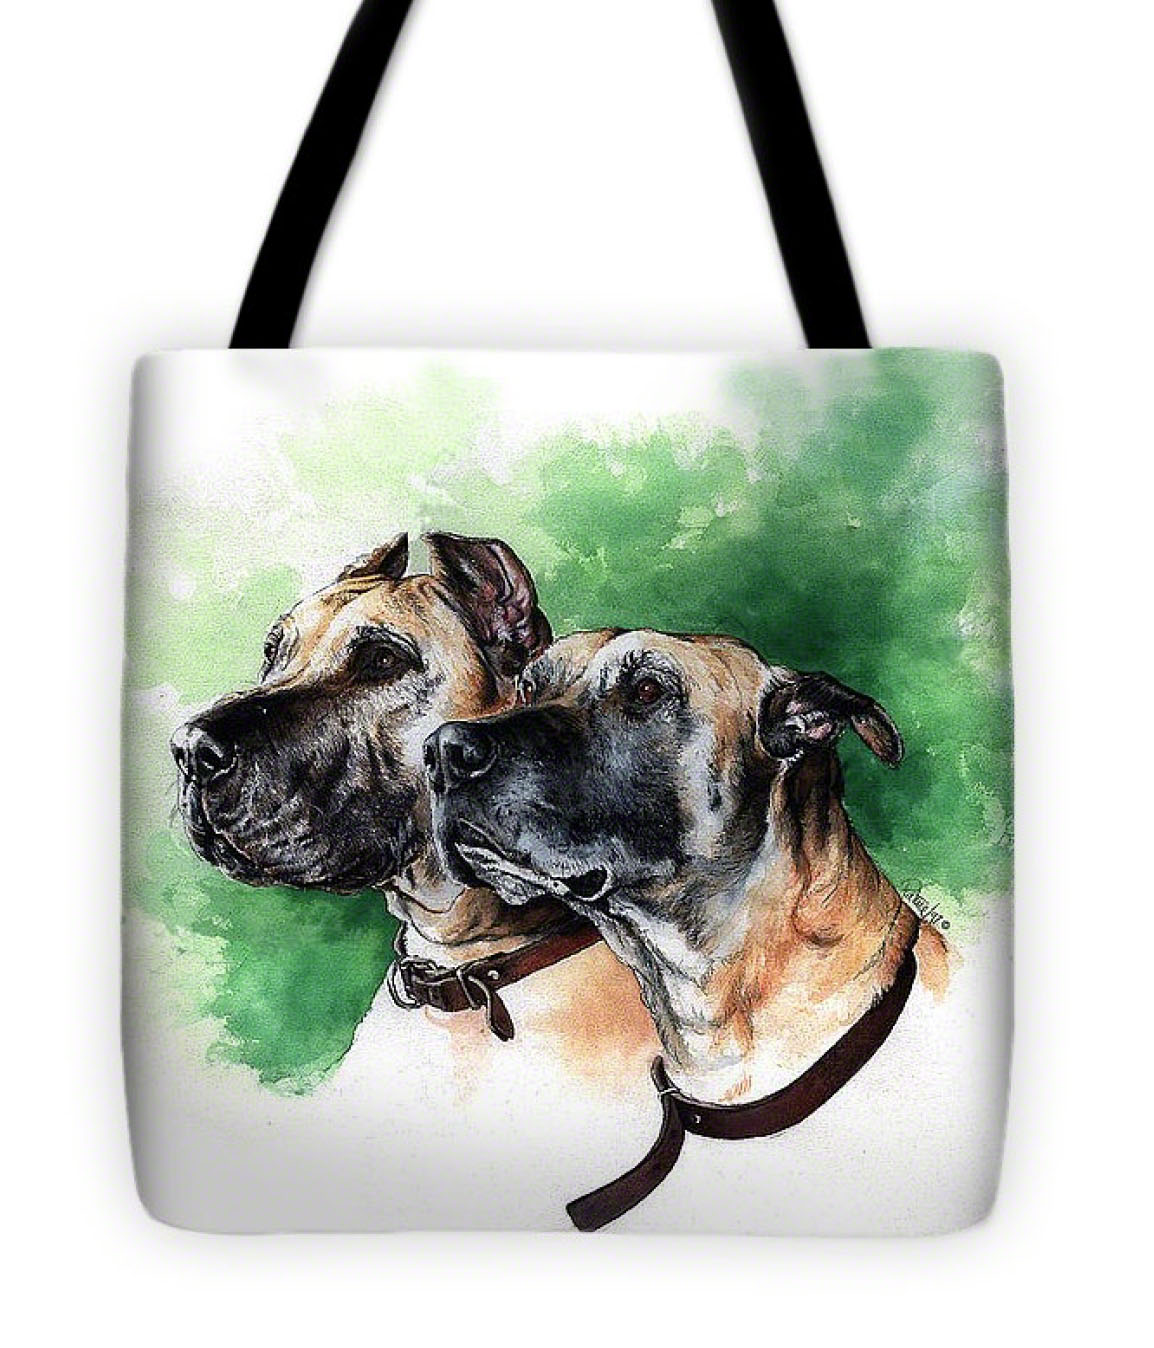 Great Dane Tote-Bag - Product by Patrice